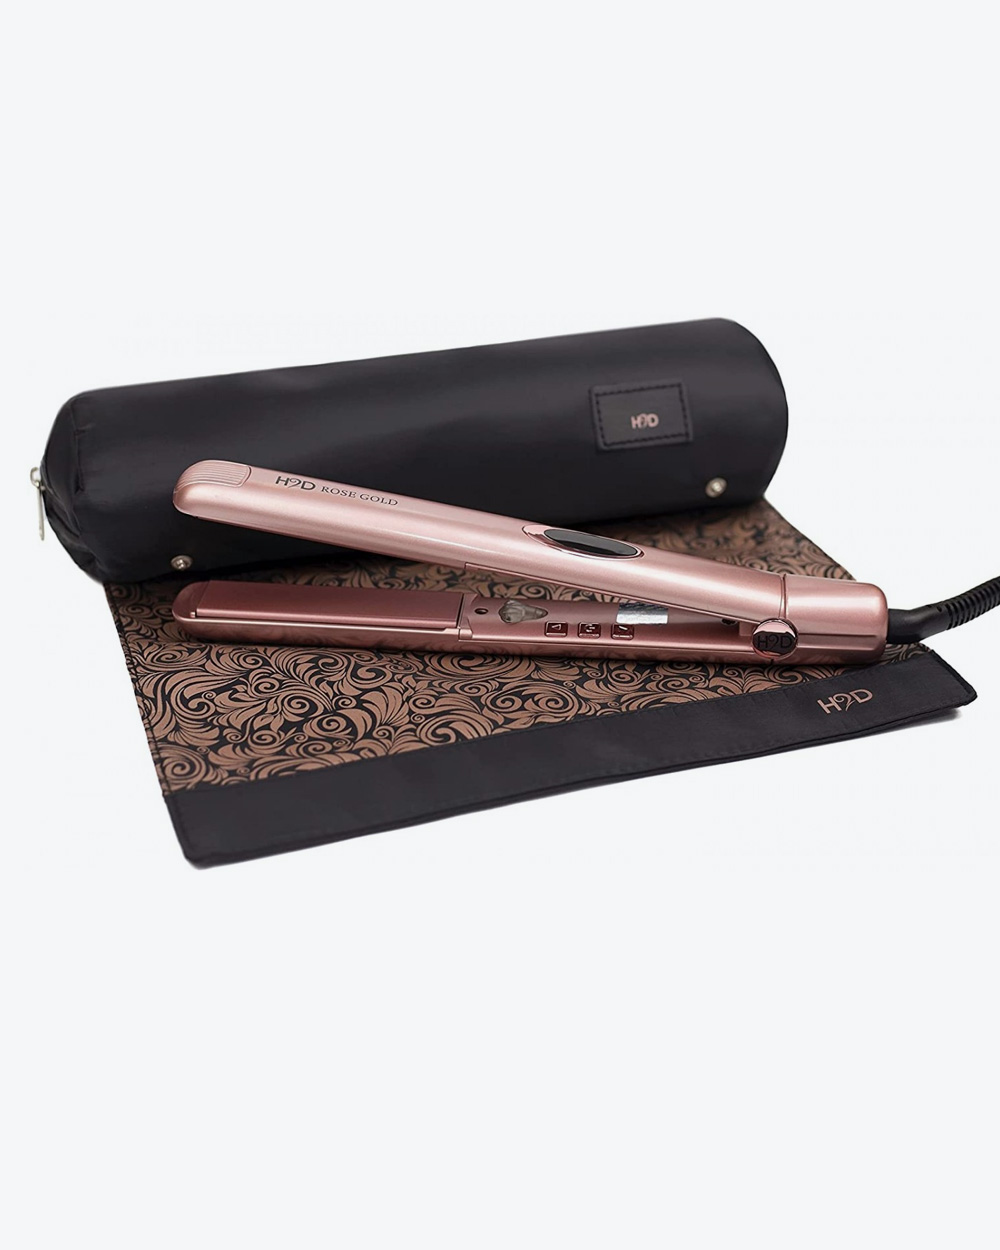 H2D VI ROSE GOLD HAIR STRAIGHTENERS / Now £